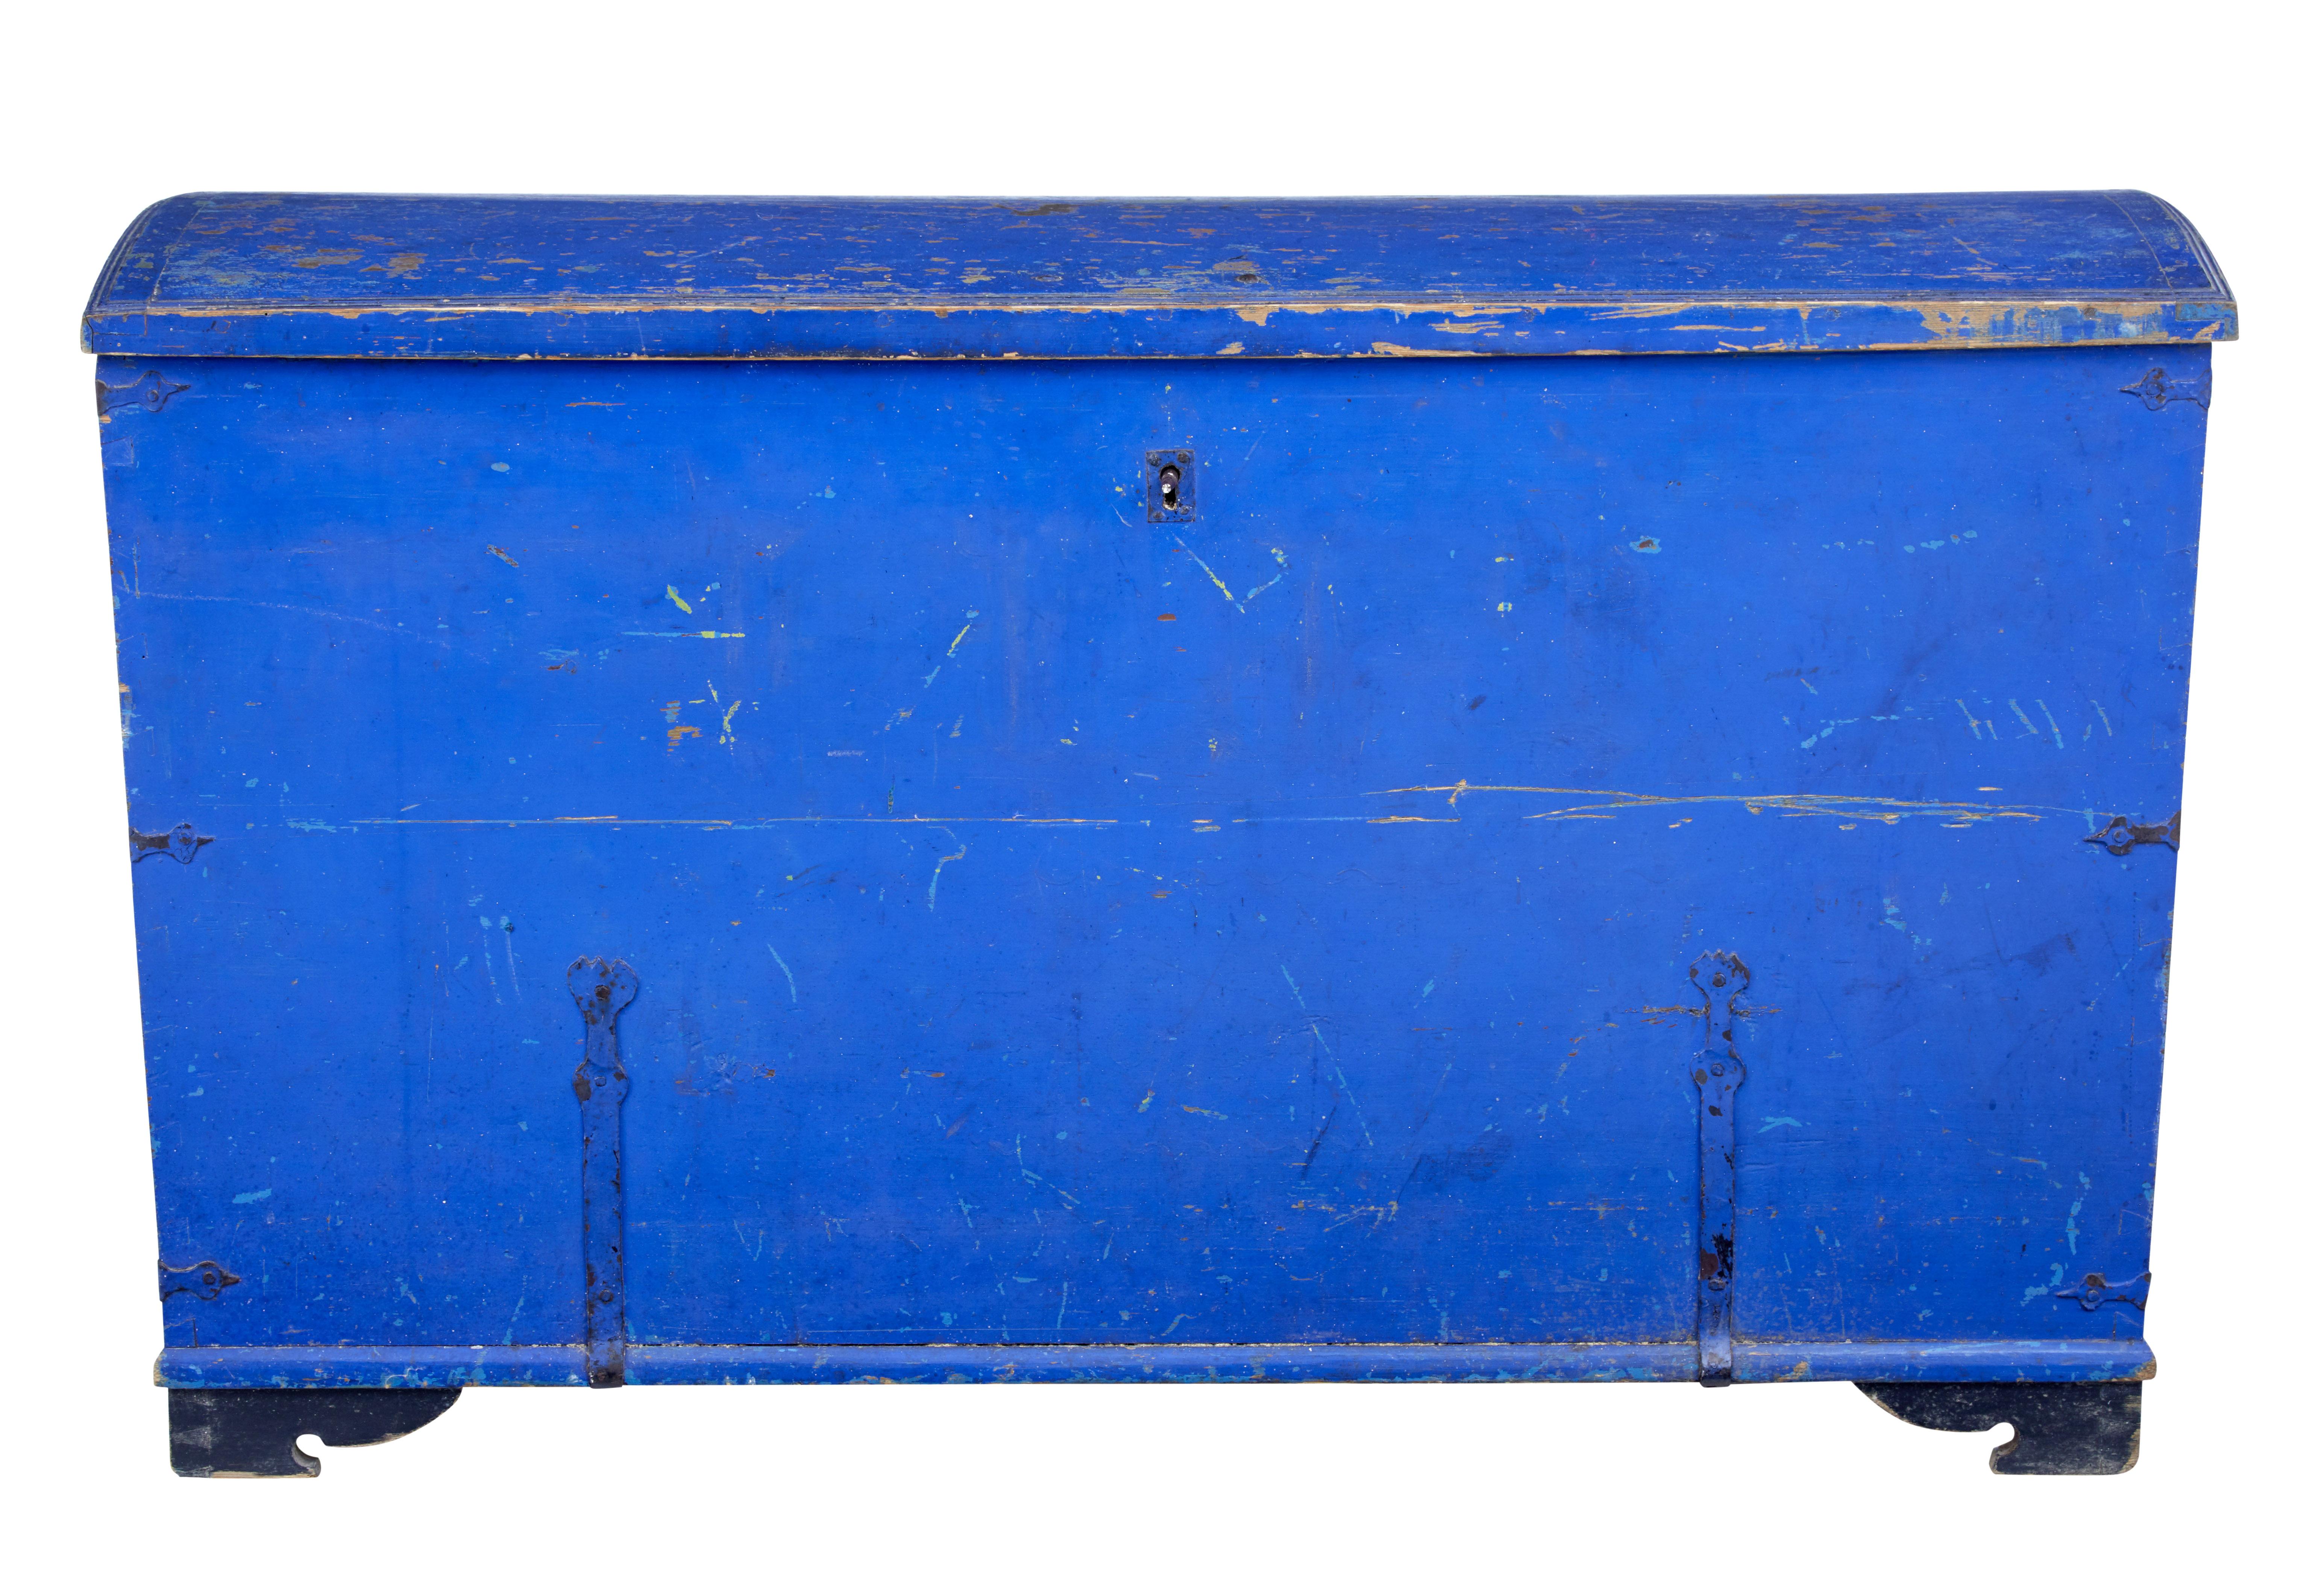 Rustic Swedish painted pine blanket box, circa 1866.

Signed with a name inside the lid and a date of 1866. Painted in a period vivid blue colour and black painted bracket feet.

Metal handles to each side, with metal decorative strap work.